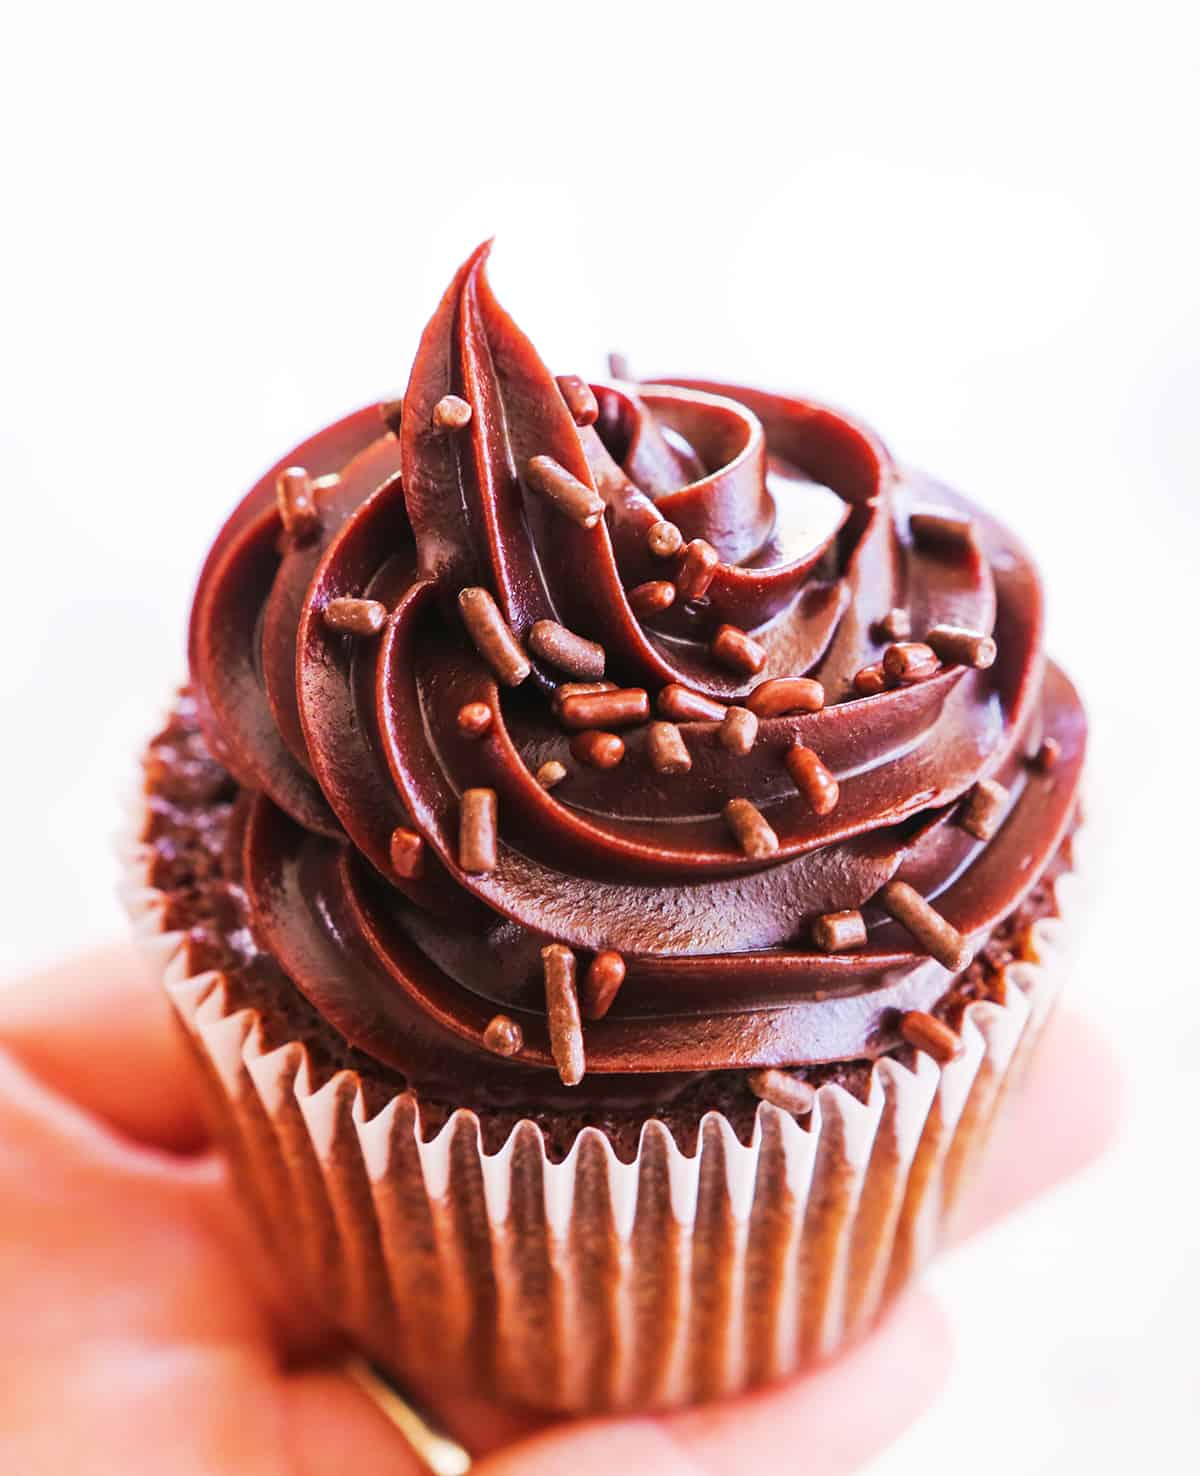 hand holding a perfect chocolate cupcake topped with ganache frosting and sprinkles